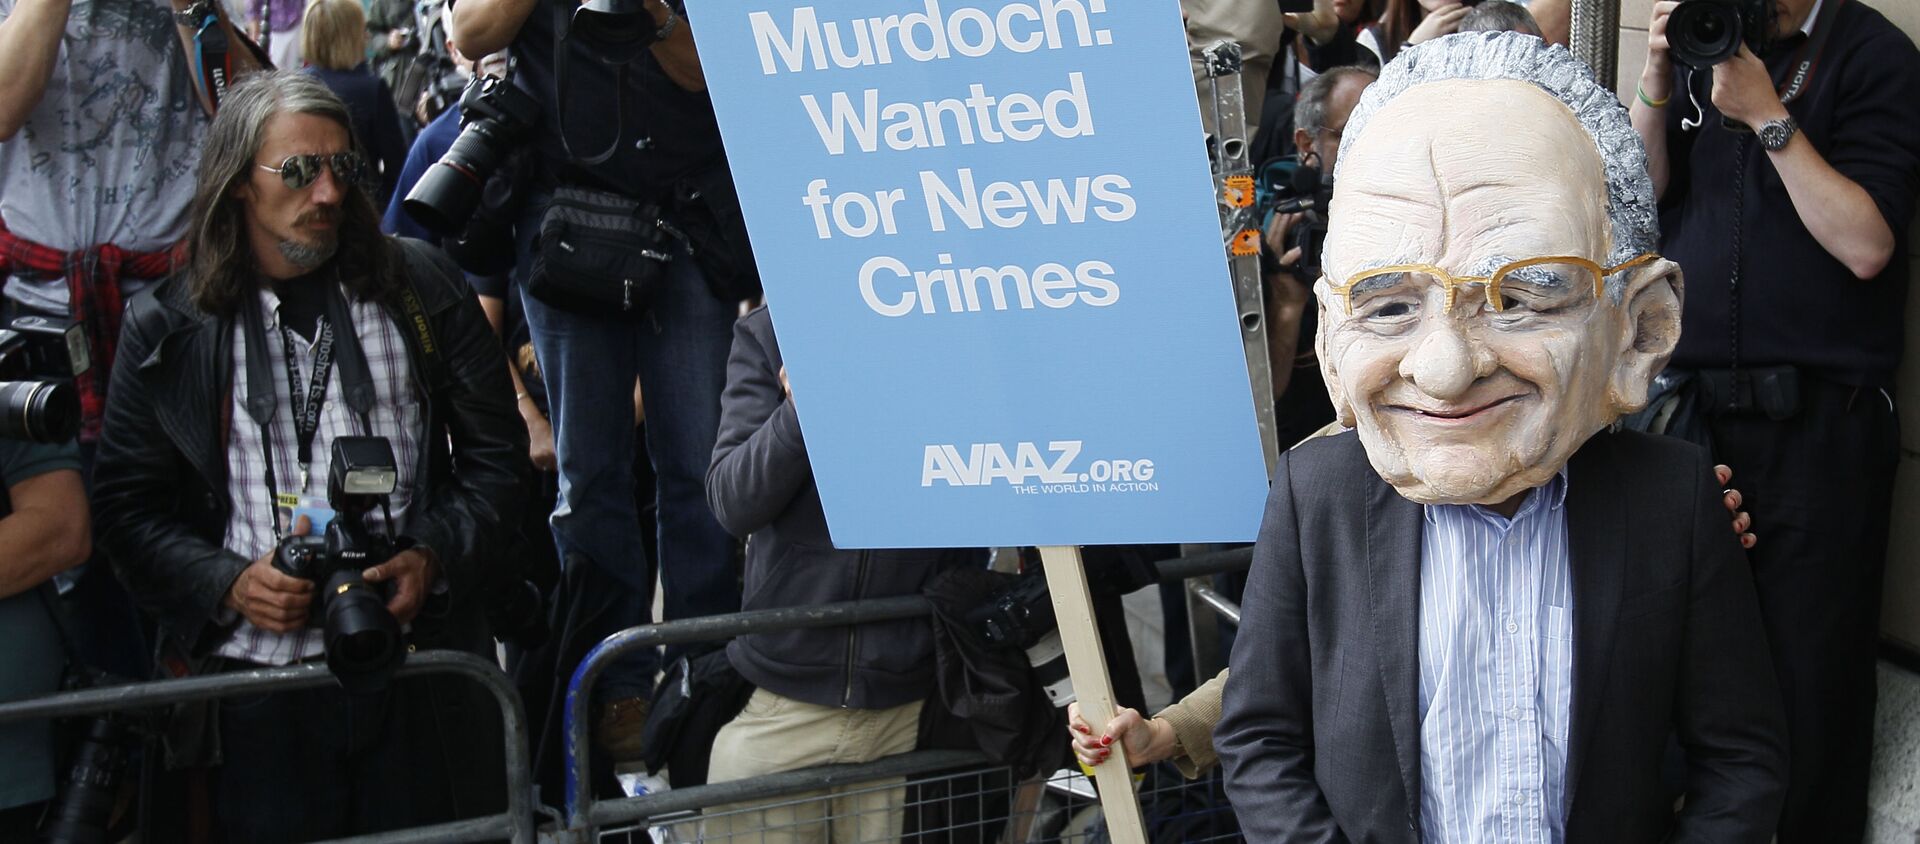 A protester wearing a Rupert Murdoch mask is photographed by media outside parliament in London, Tuesday, July 19, 2011.  - Sputnik International, 1920, 03.08.2021